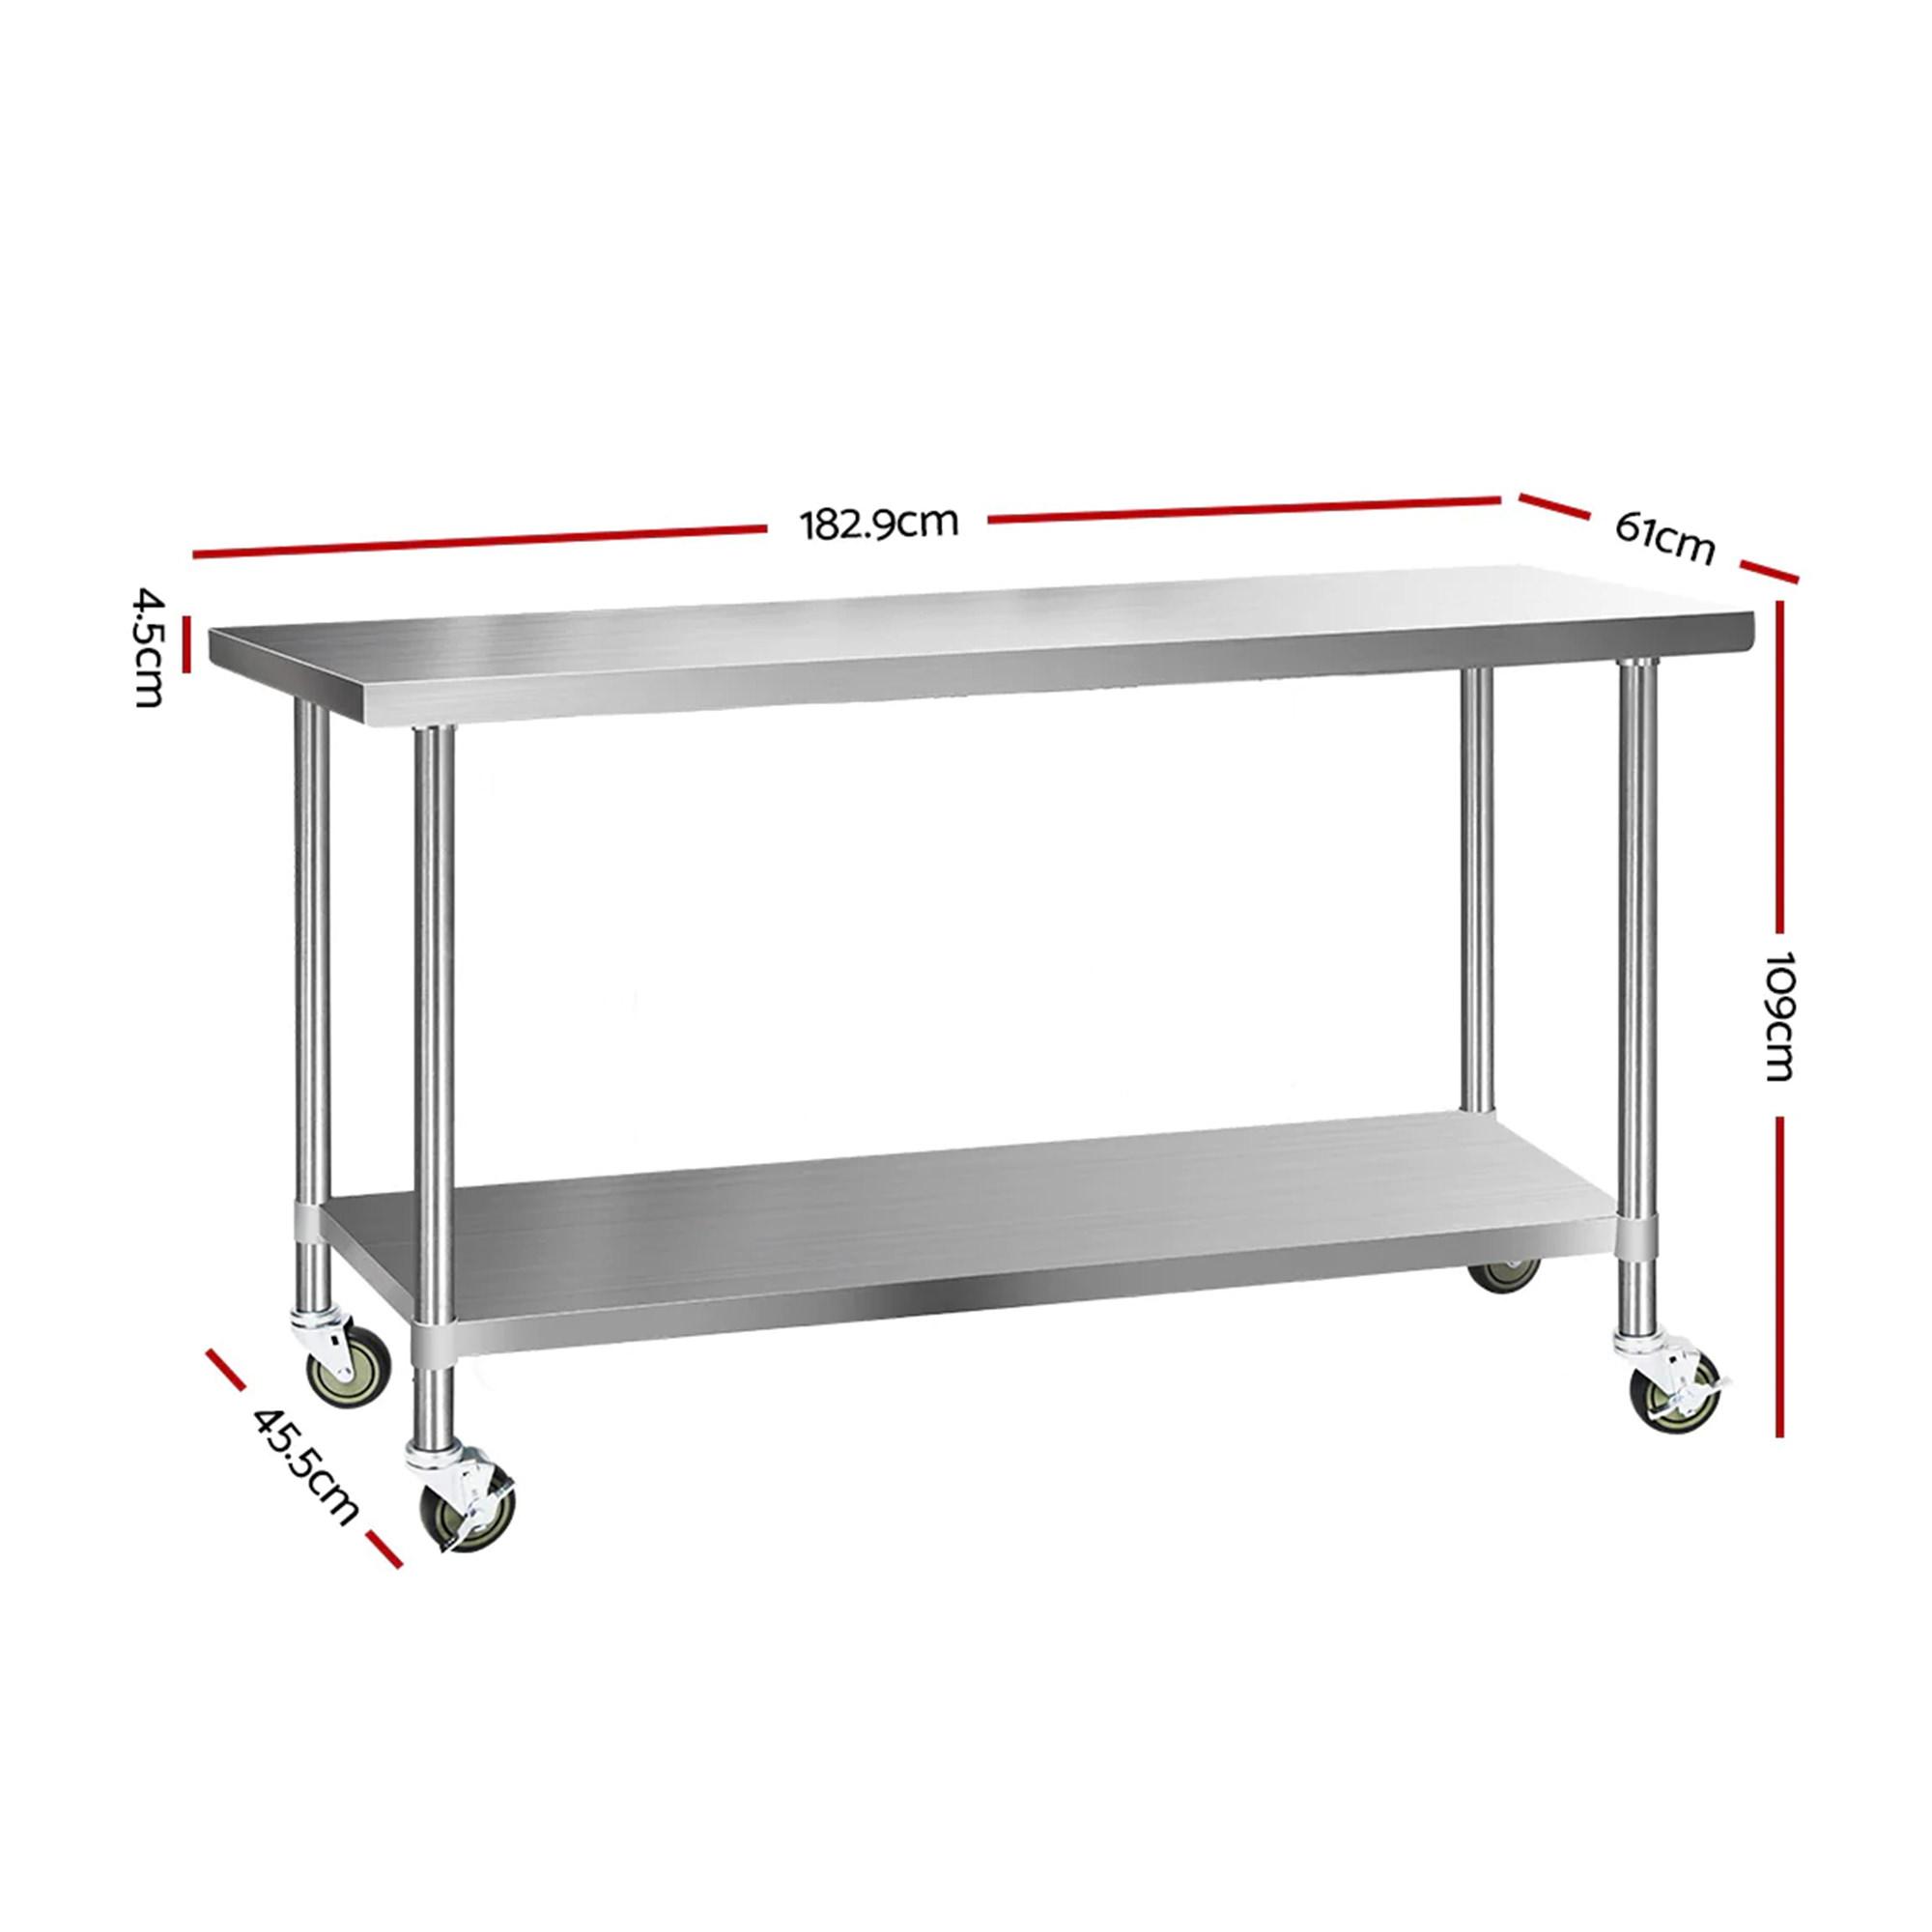 Cefito 304 Stainless Steel Kitchen Bench with Wheels 182.9x61cm Image 3